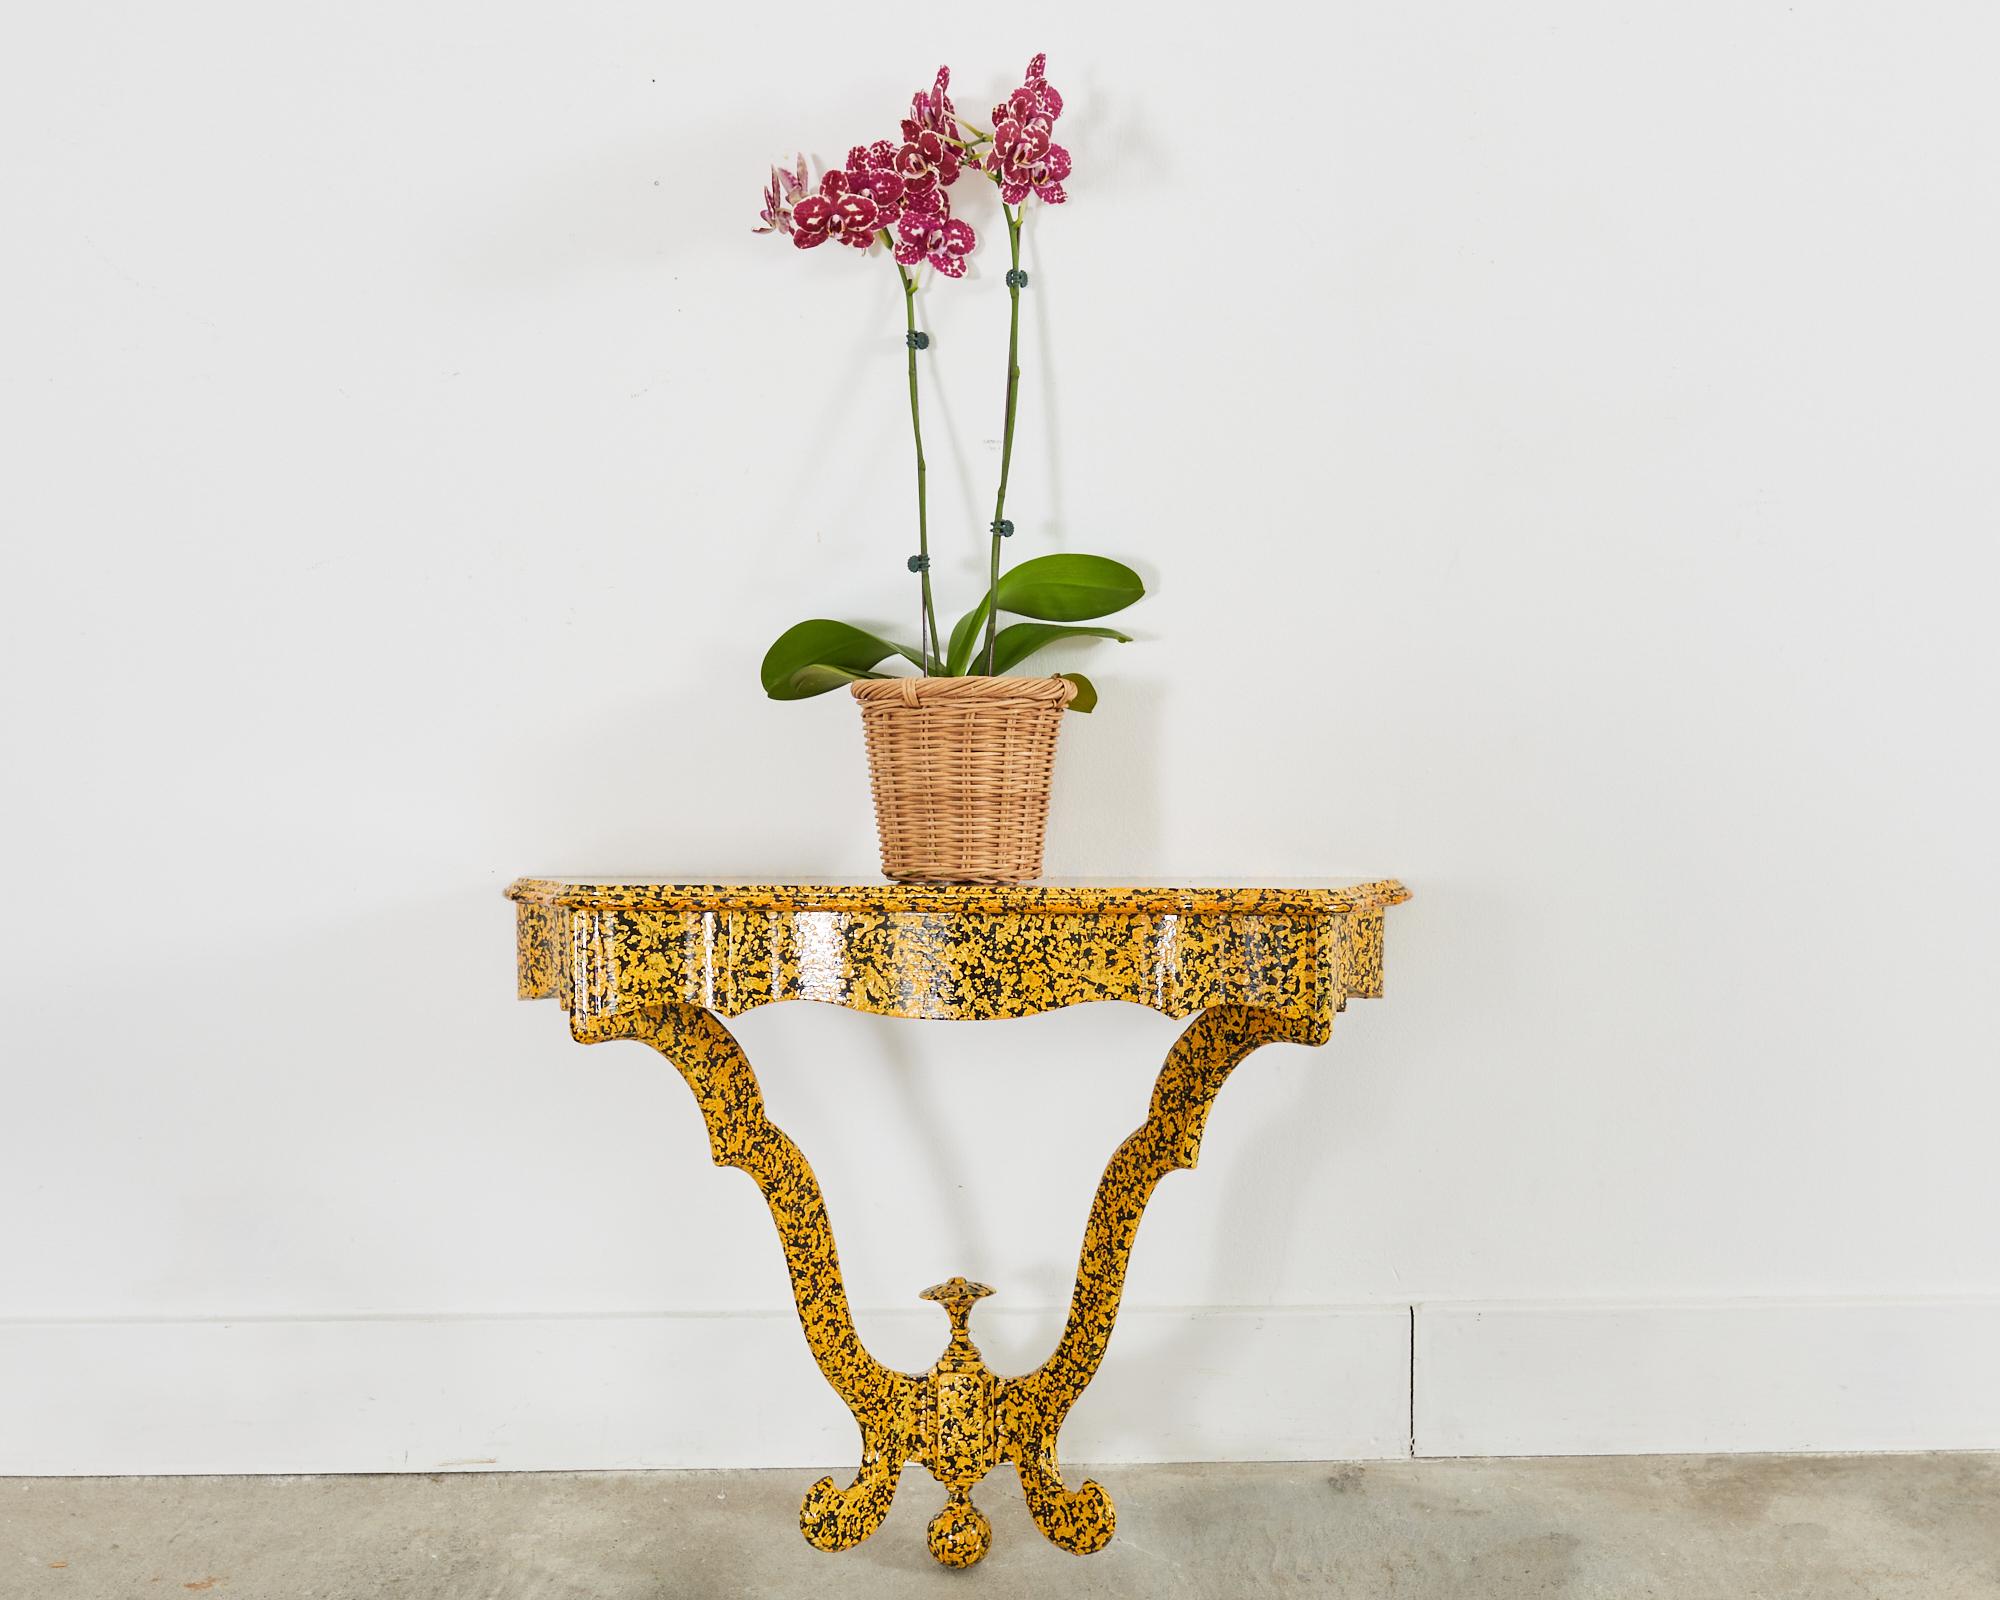 Whimsical late 19th century English Victorian wall mounted console table or shelf crafted from solid mahogany. The shelf features a modern redux by artist Ira Yeager (American 1938-2022). The console has been lacquered in black and painstakingly